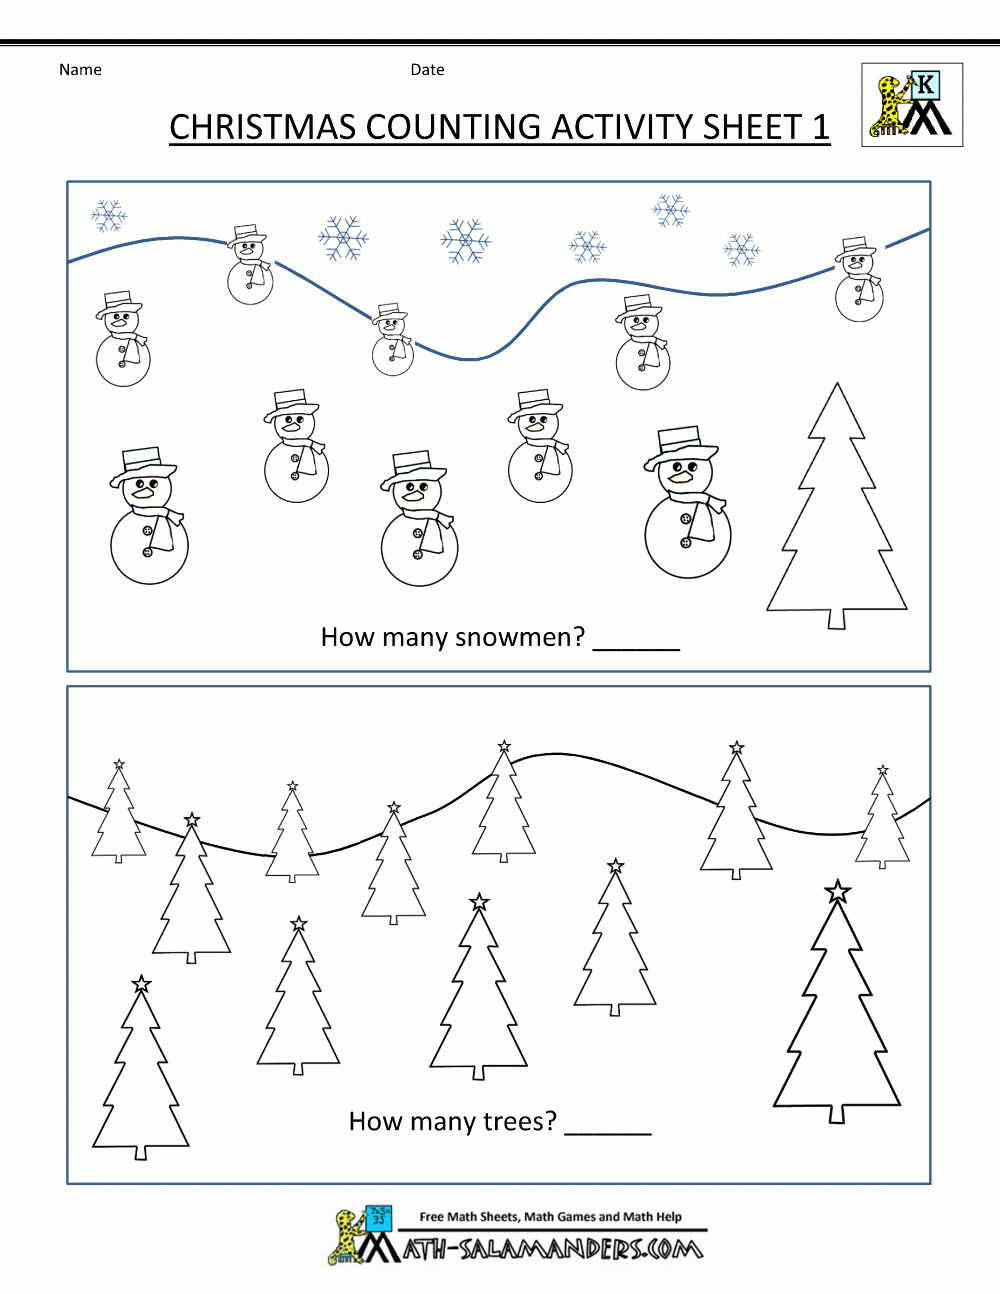 holiday-worksheets-for-grade-1-db-excel